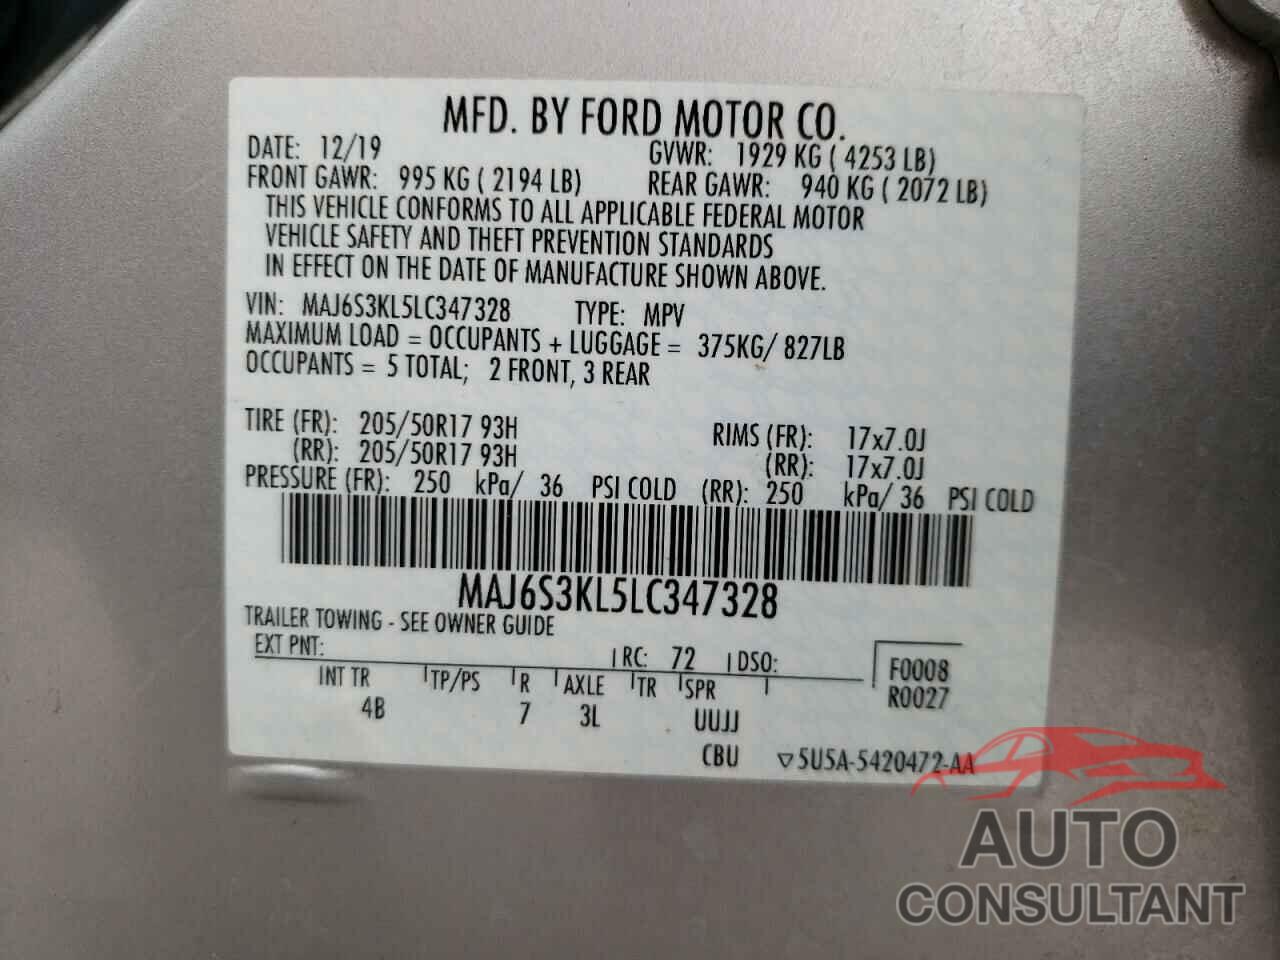 FORD ALL OTHER 2020 - MAJ6S3KL5LC347328